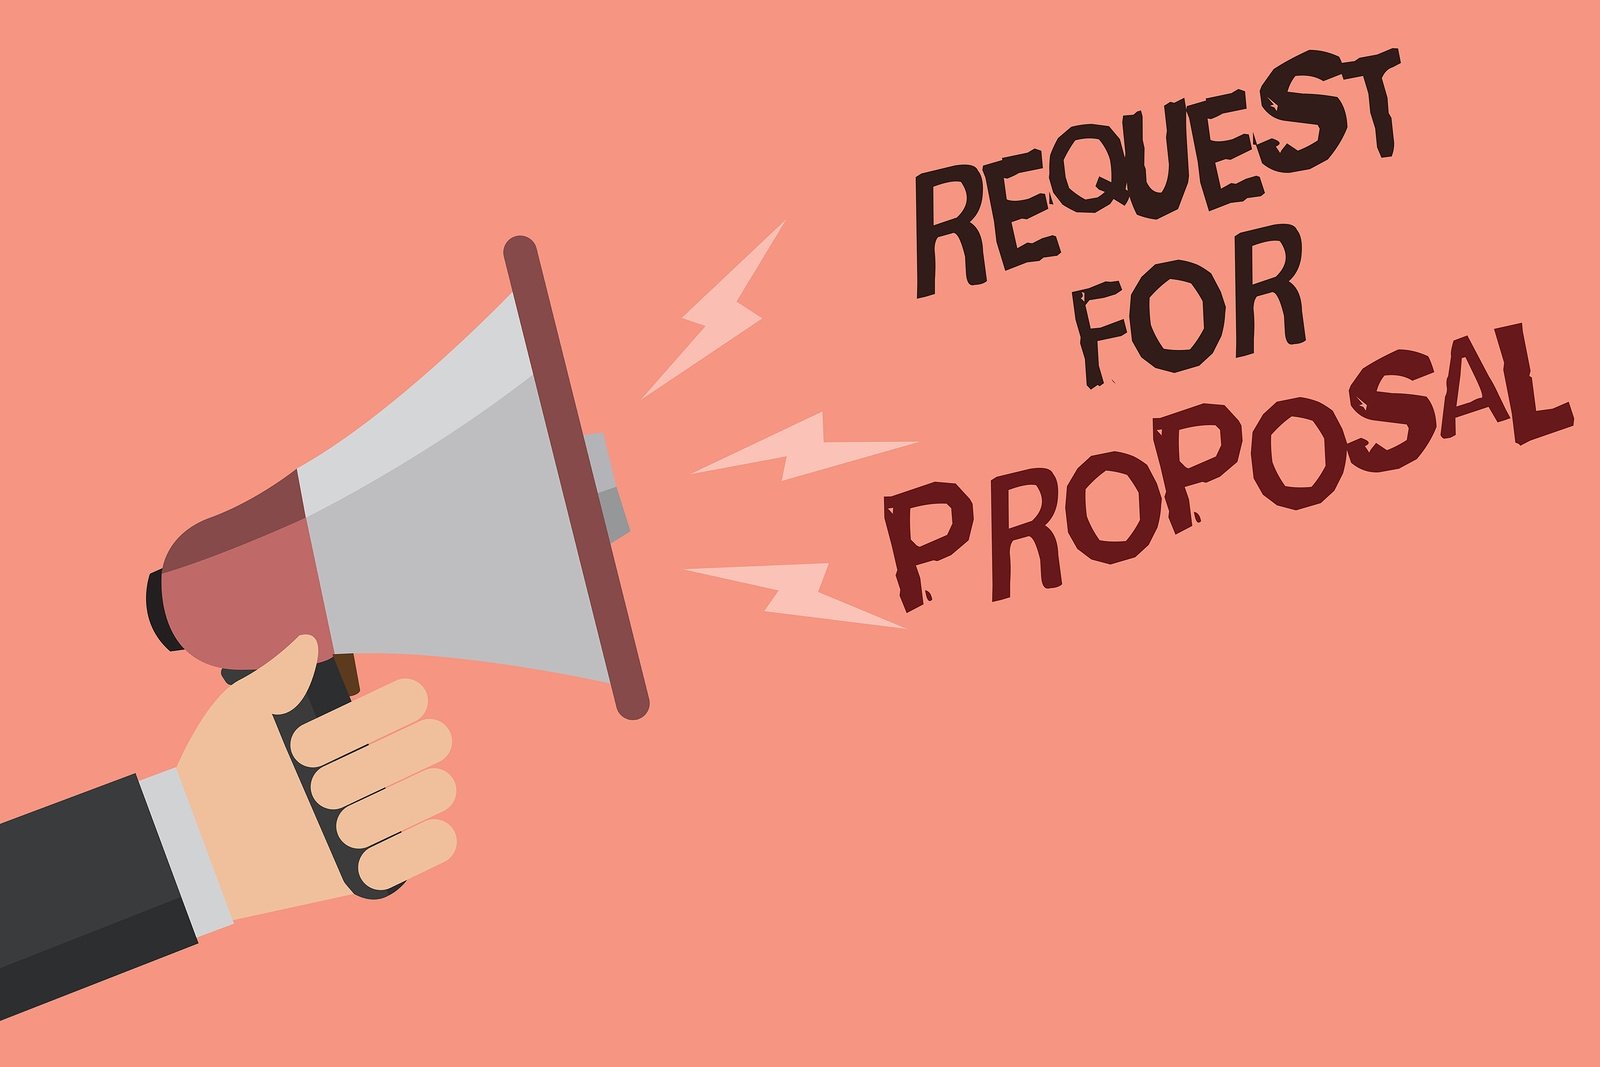 janitorial bids, janitorial requests for proposal, janitorial rfps, leaning rfps